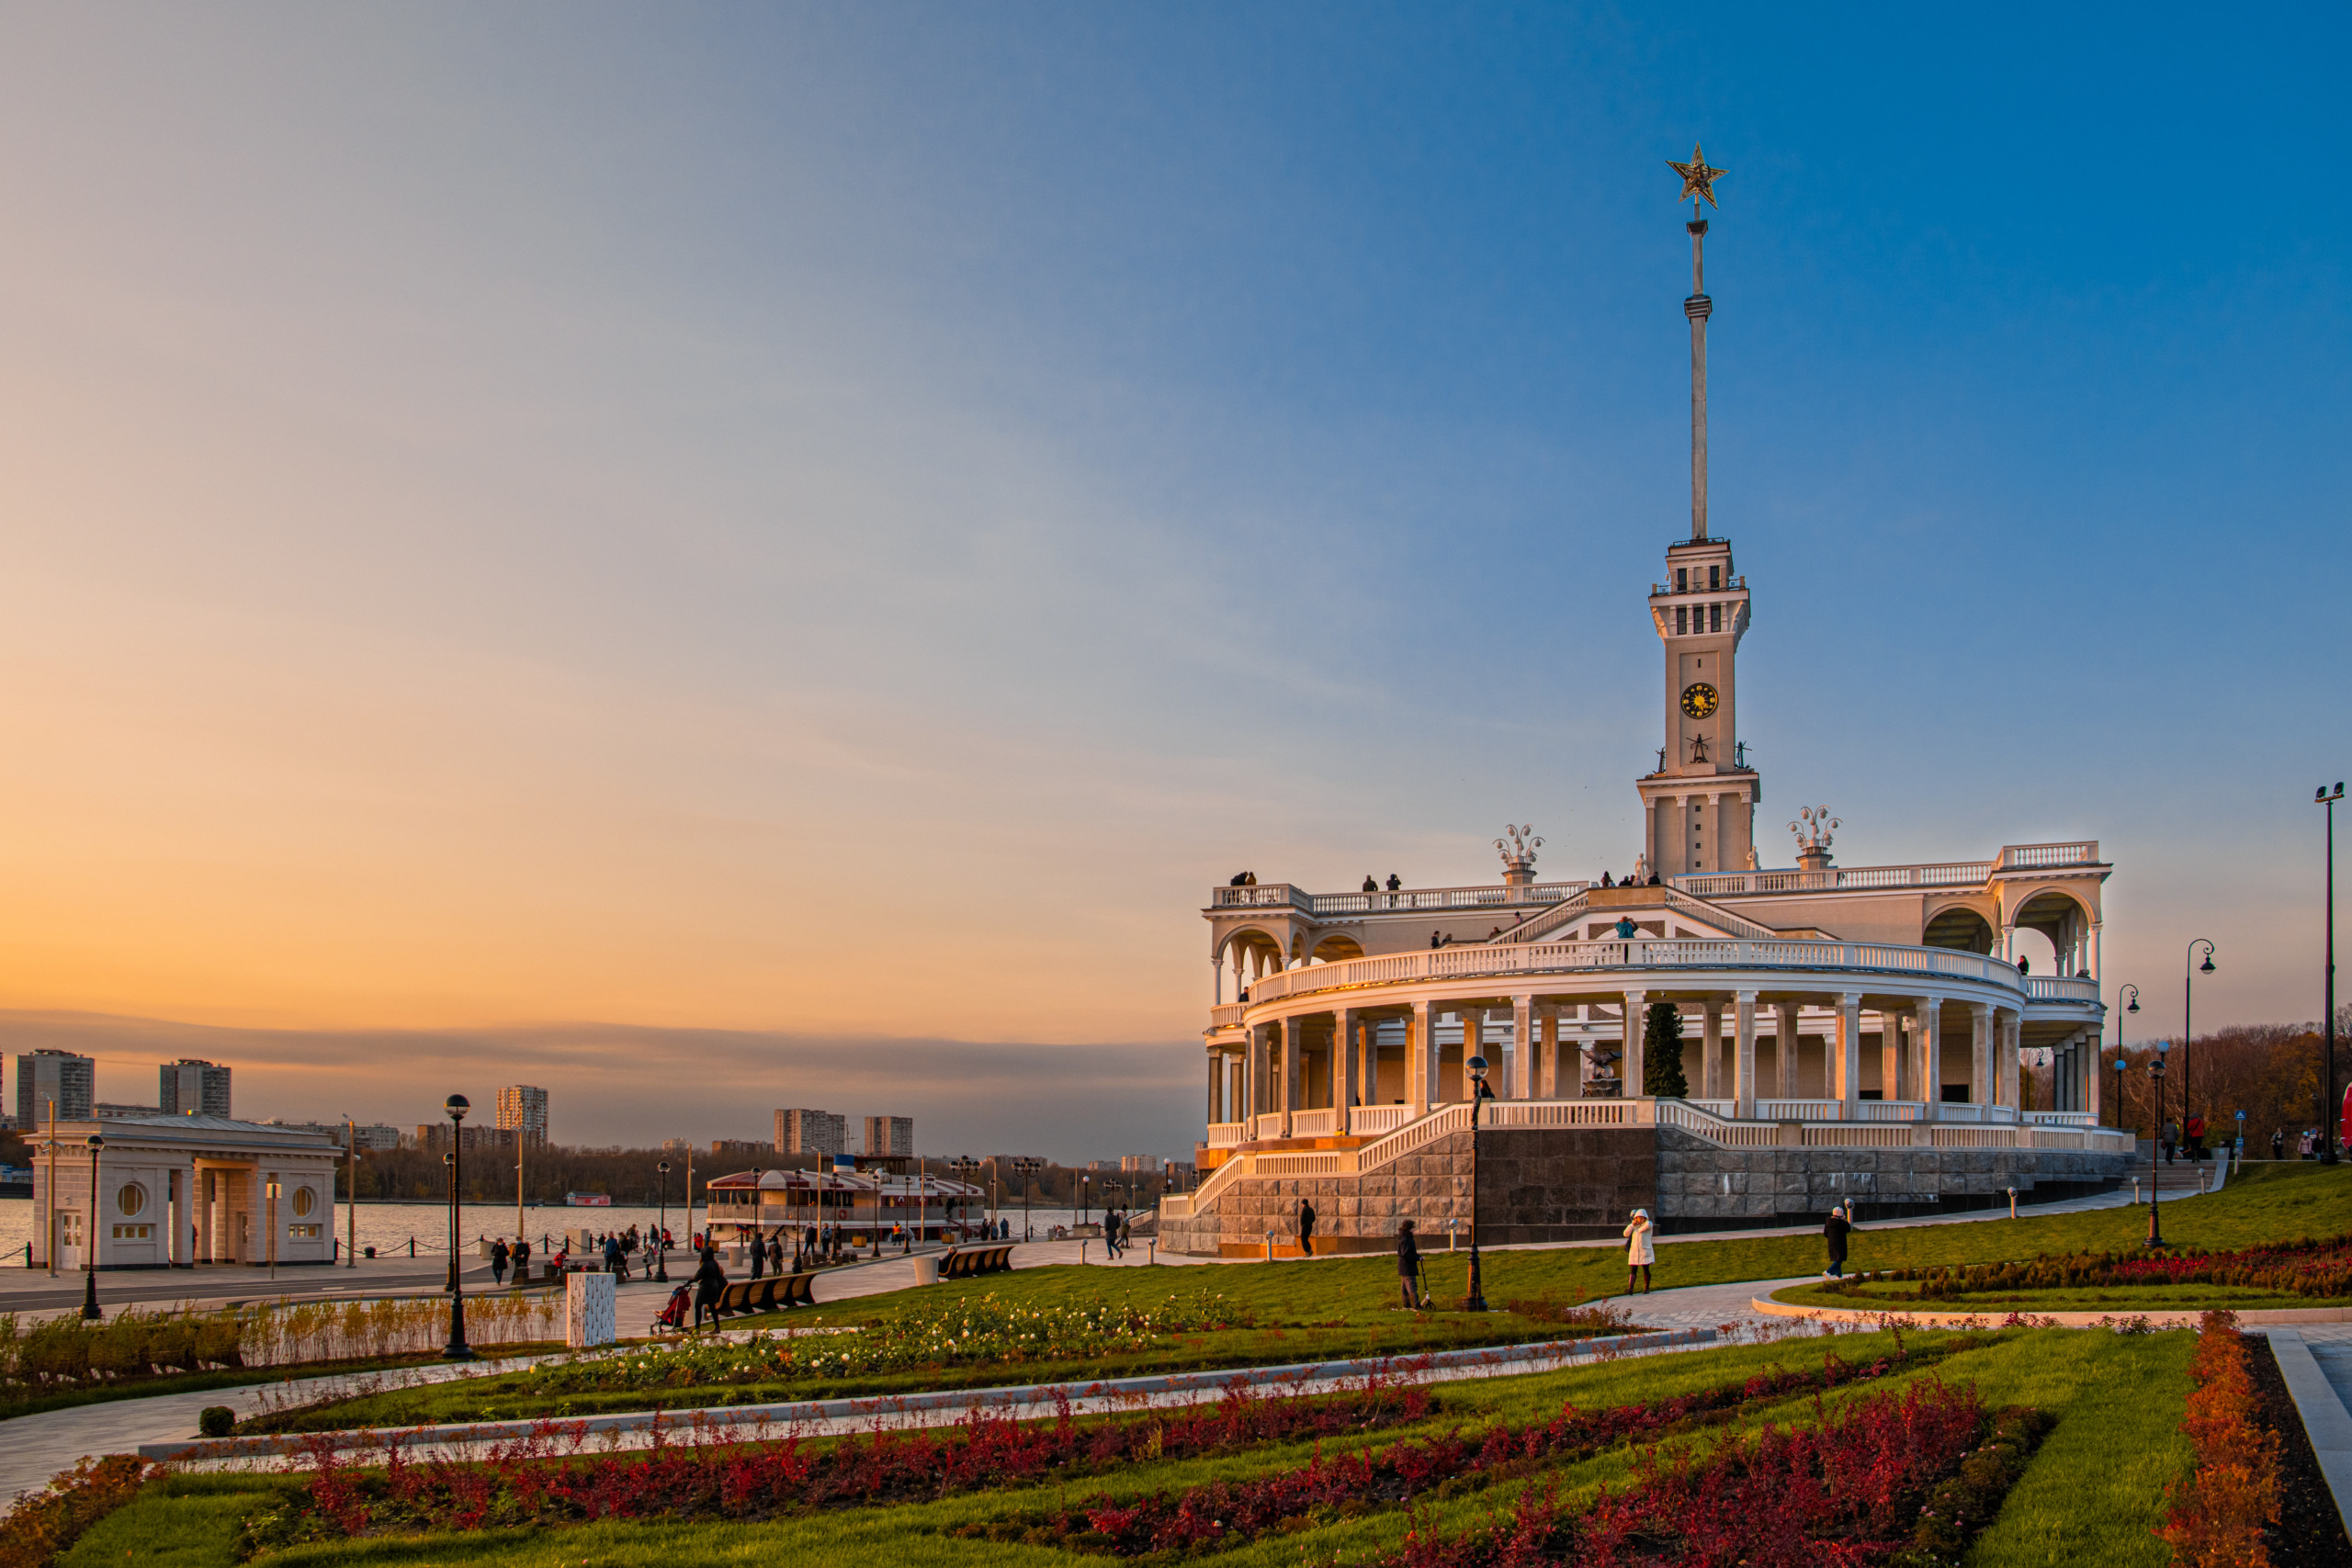 The renovated River Boat terminal which was completed in 2021 on the Moscow River. 